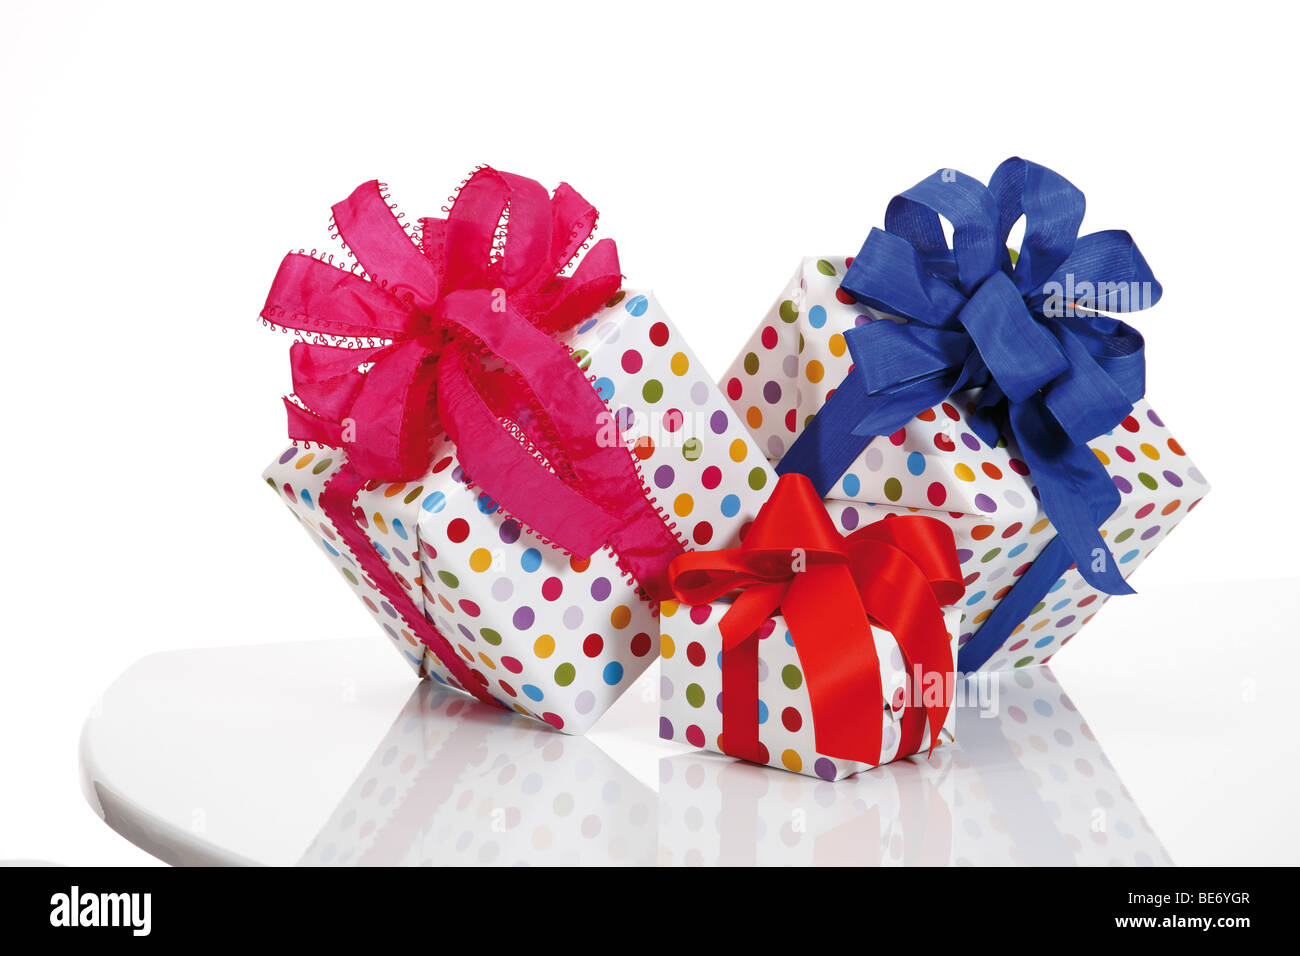 Presents with ribbons Stock Photo